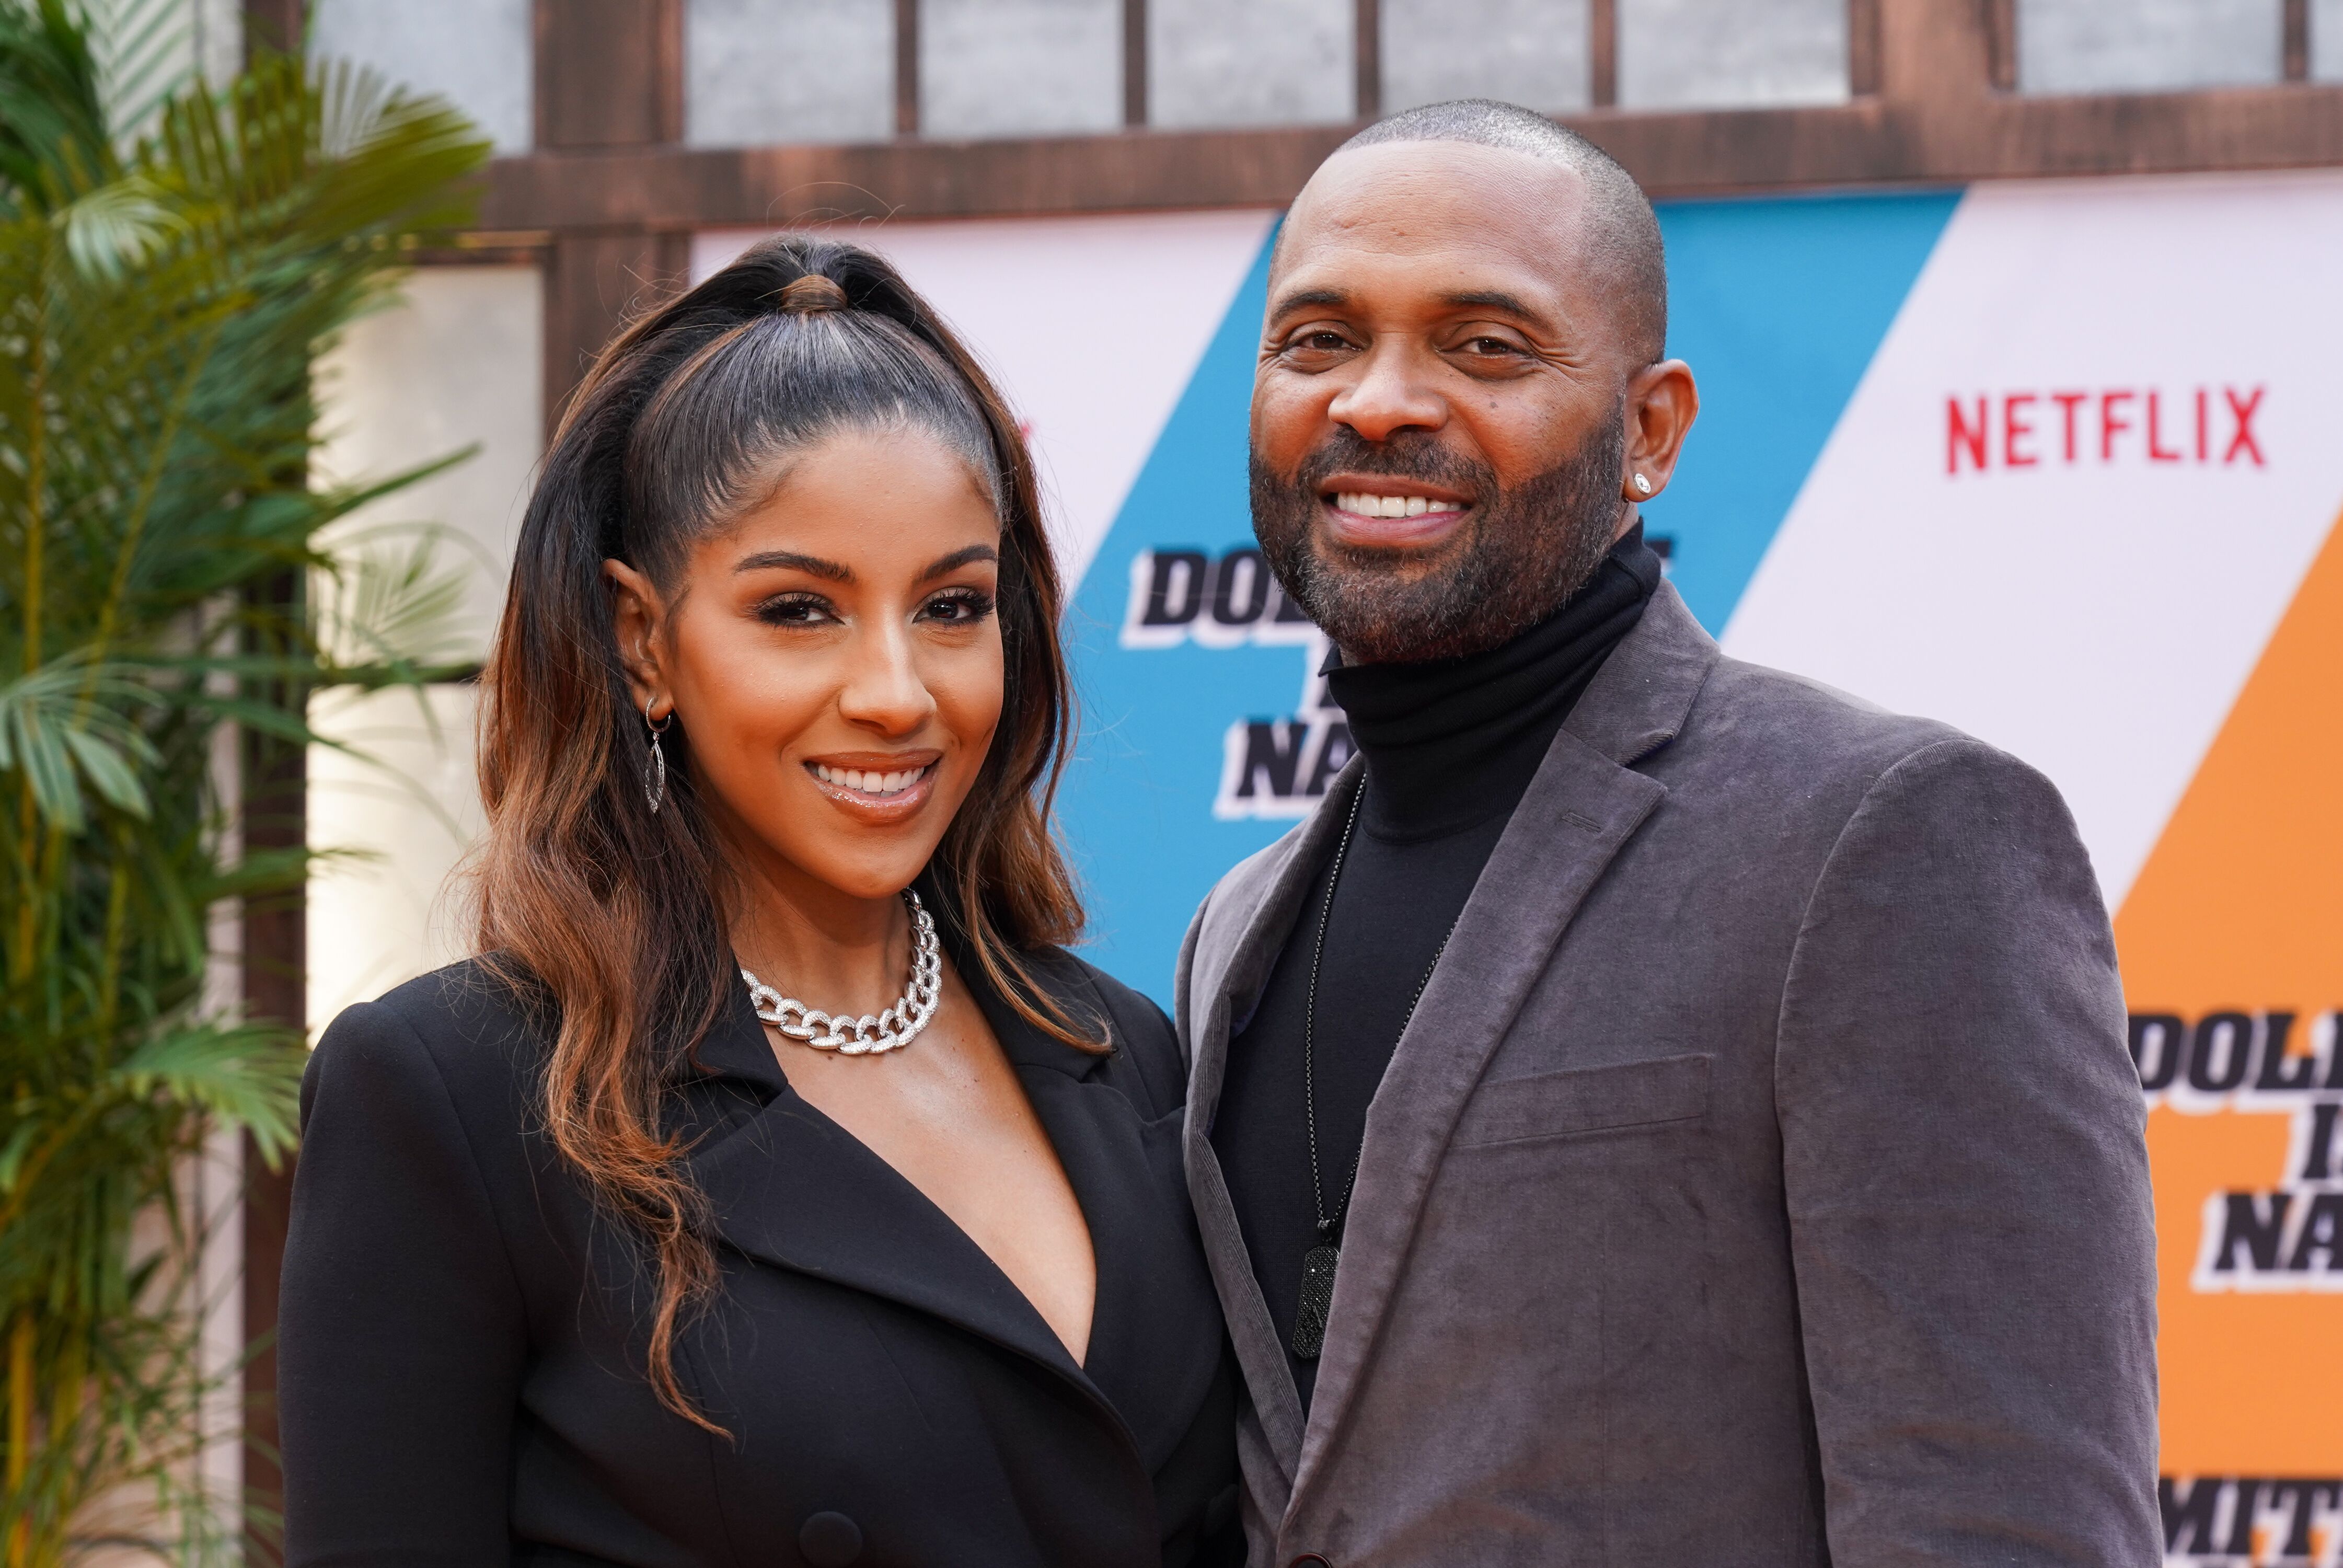 Mike Epps and Kyra Robinson attend the LA premiere of Netflix's "Dolemite Is My Name" on September 28, 2019. | Source: Getty Images